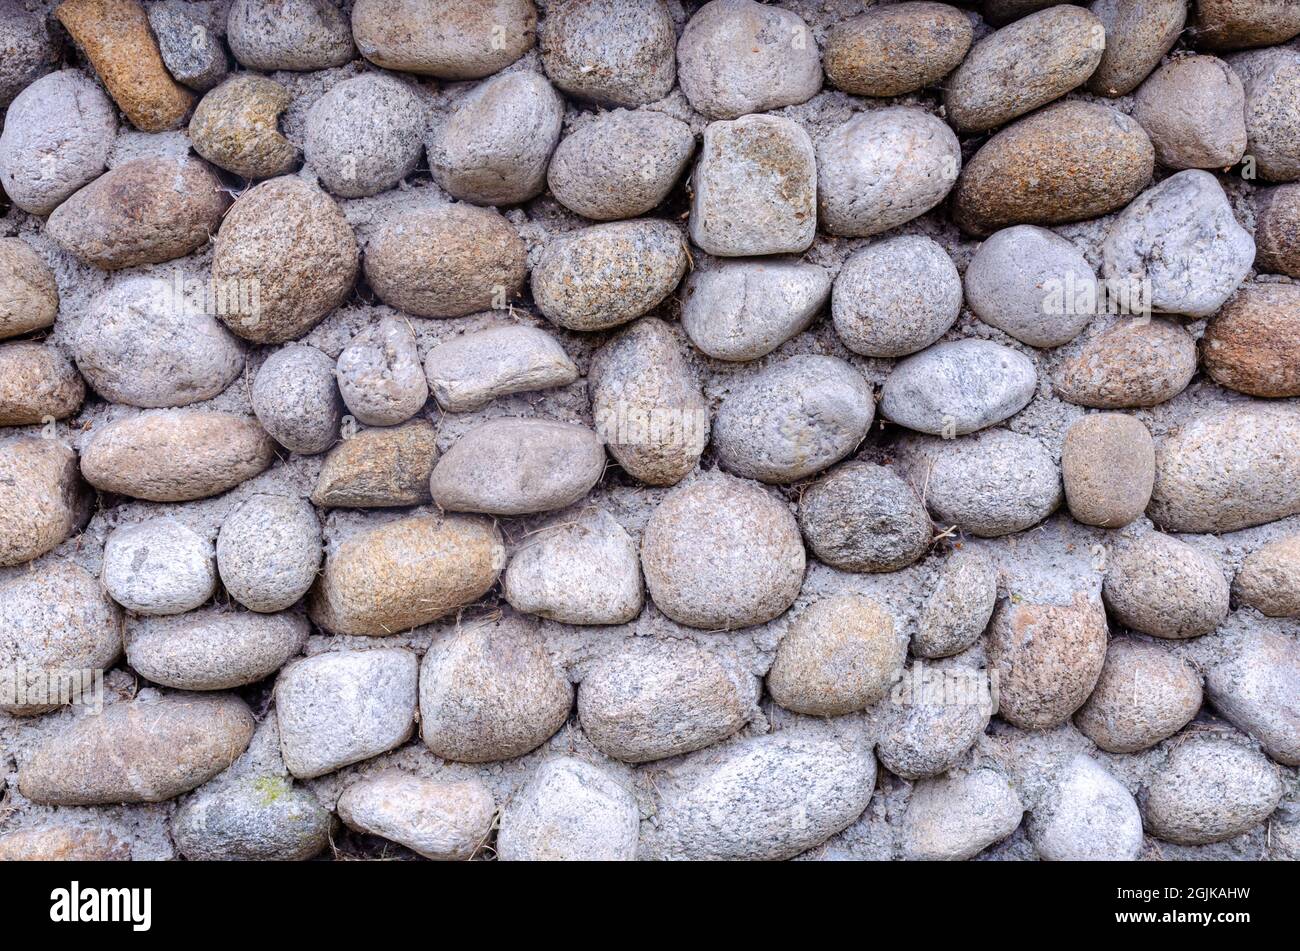 Background From Oval Stones. Vol Stones Wall. River Pebble Wall   pebble stone floor and wall pattern arranged for  texture wallpaper Stock Photo - Alamy